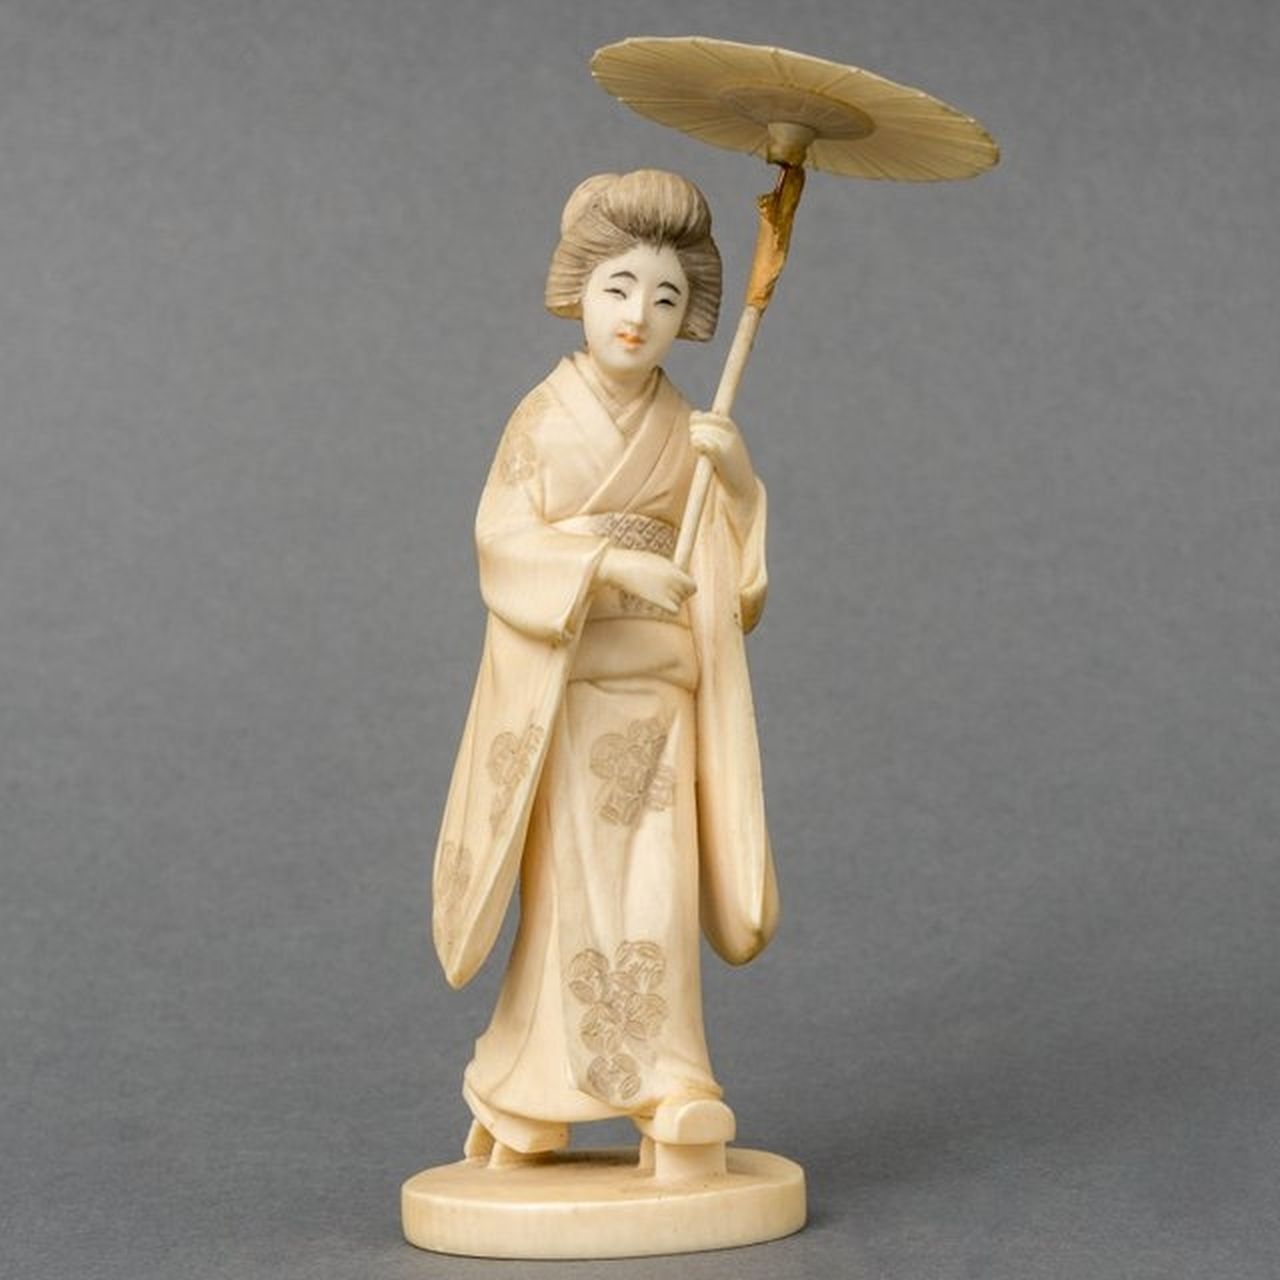 Japanse School, 19e eeuw   | Japanse School, 19e eeuw | Sculptures and objects offered for sale | Okimono of a woman in a kimono holding a parasol, ivory 13.0 cm